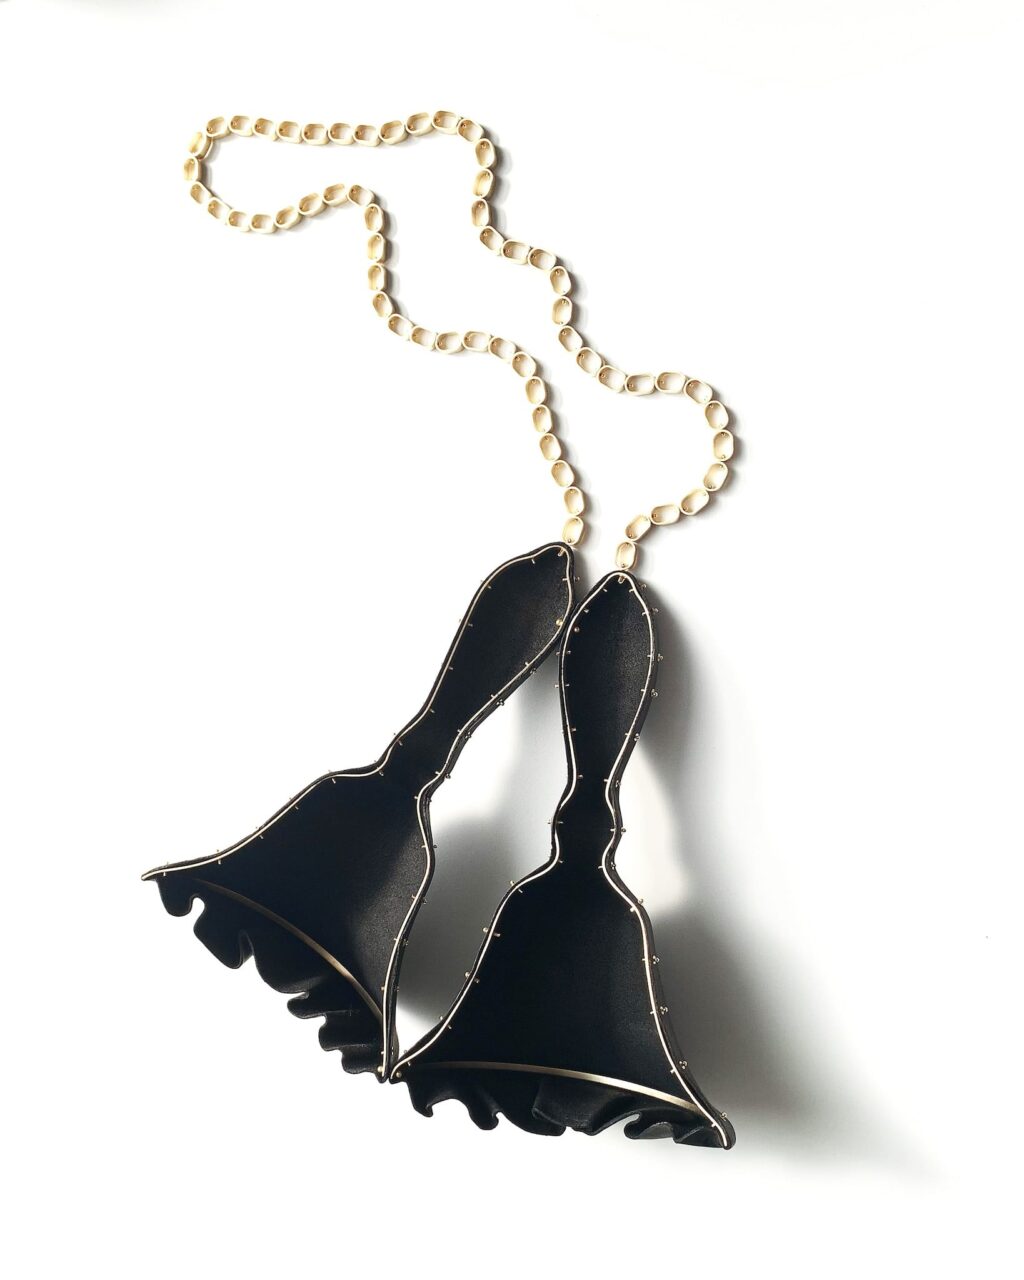 Kerianne Quick, Rags to firmly ensconced in a middle class life: peddlers bell necklace, Craft in America